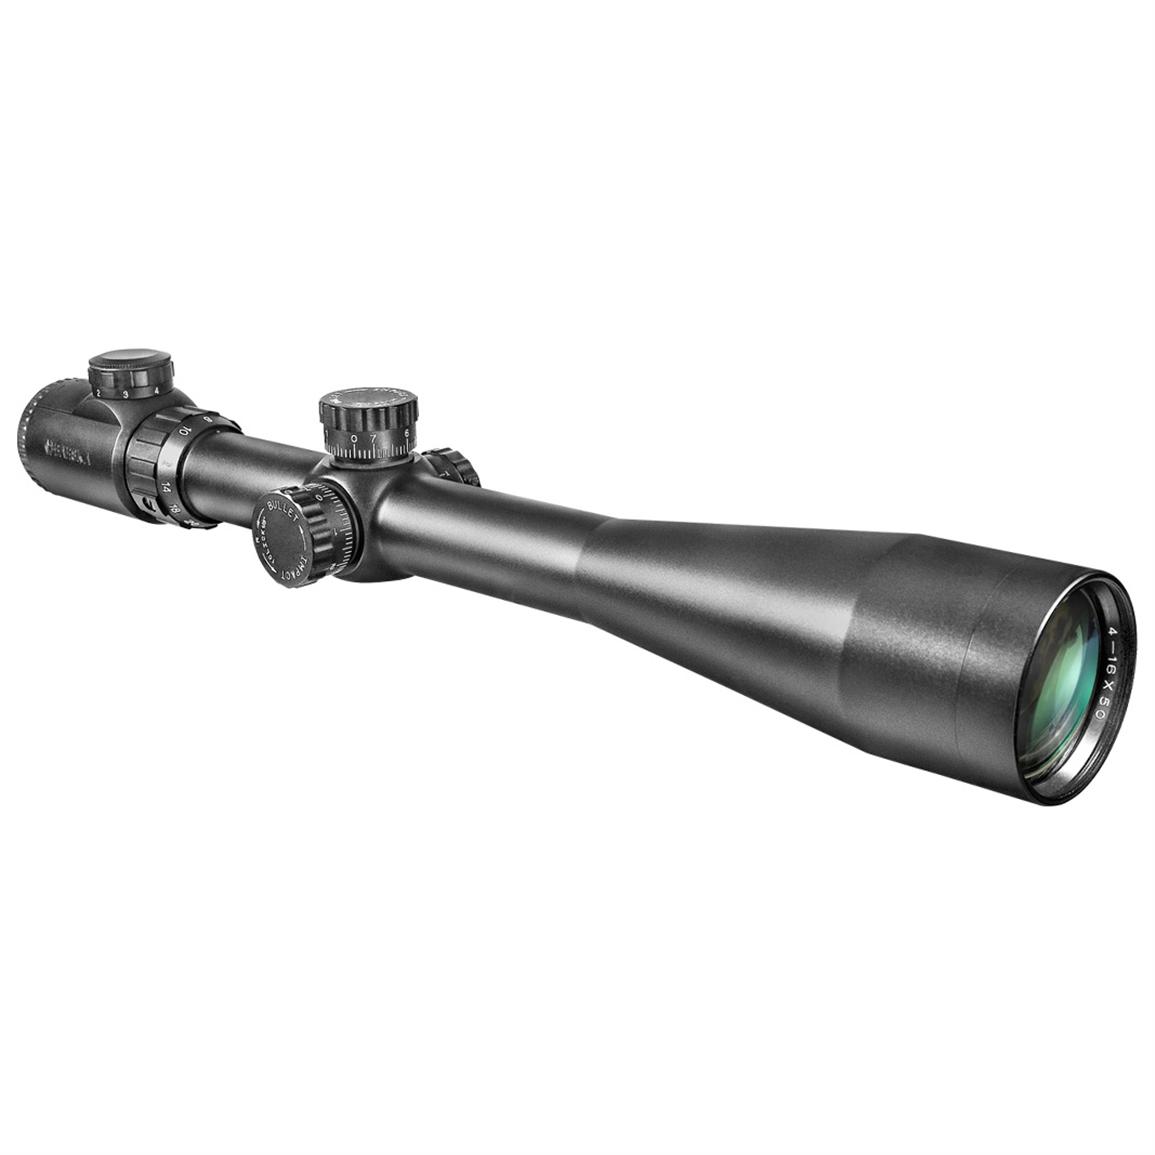 Barska 10-40x50 mm IR Extreme Tactical Rifle Scope with Rings